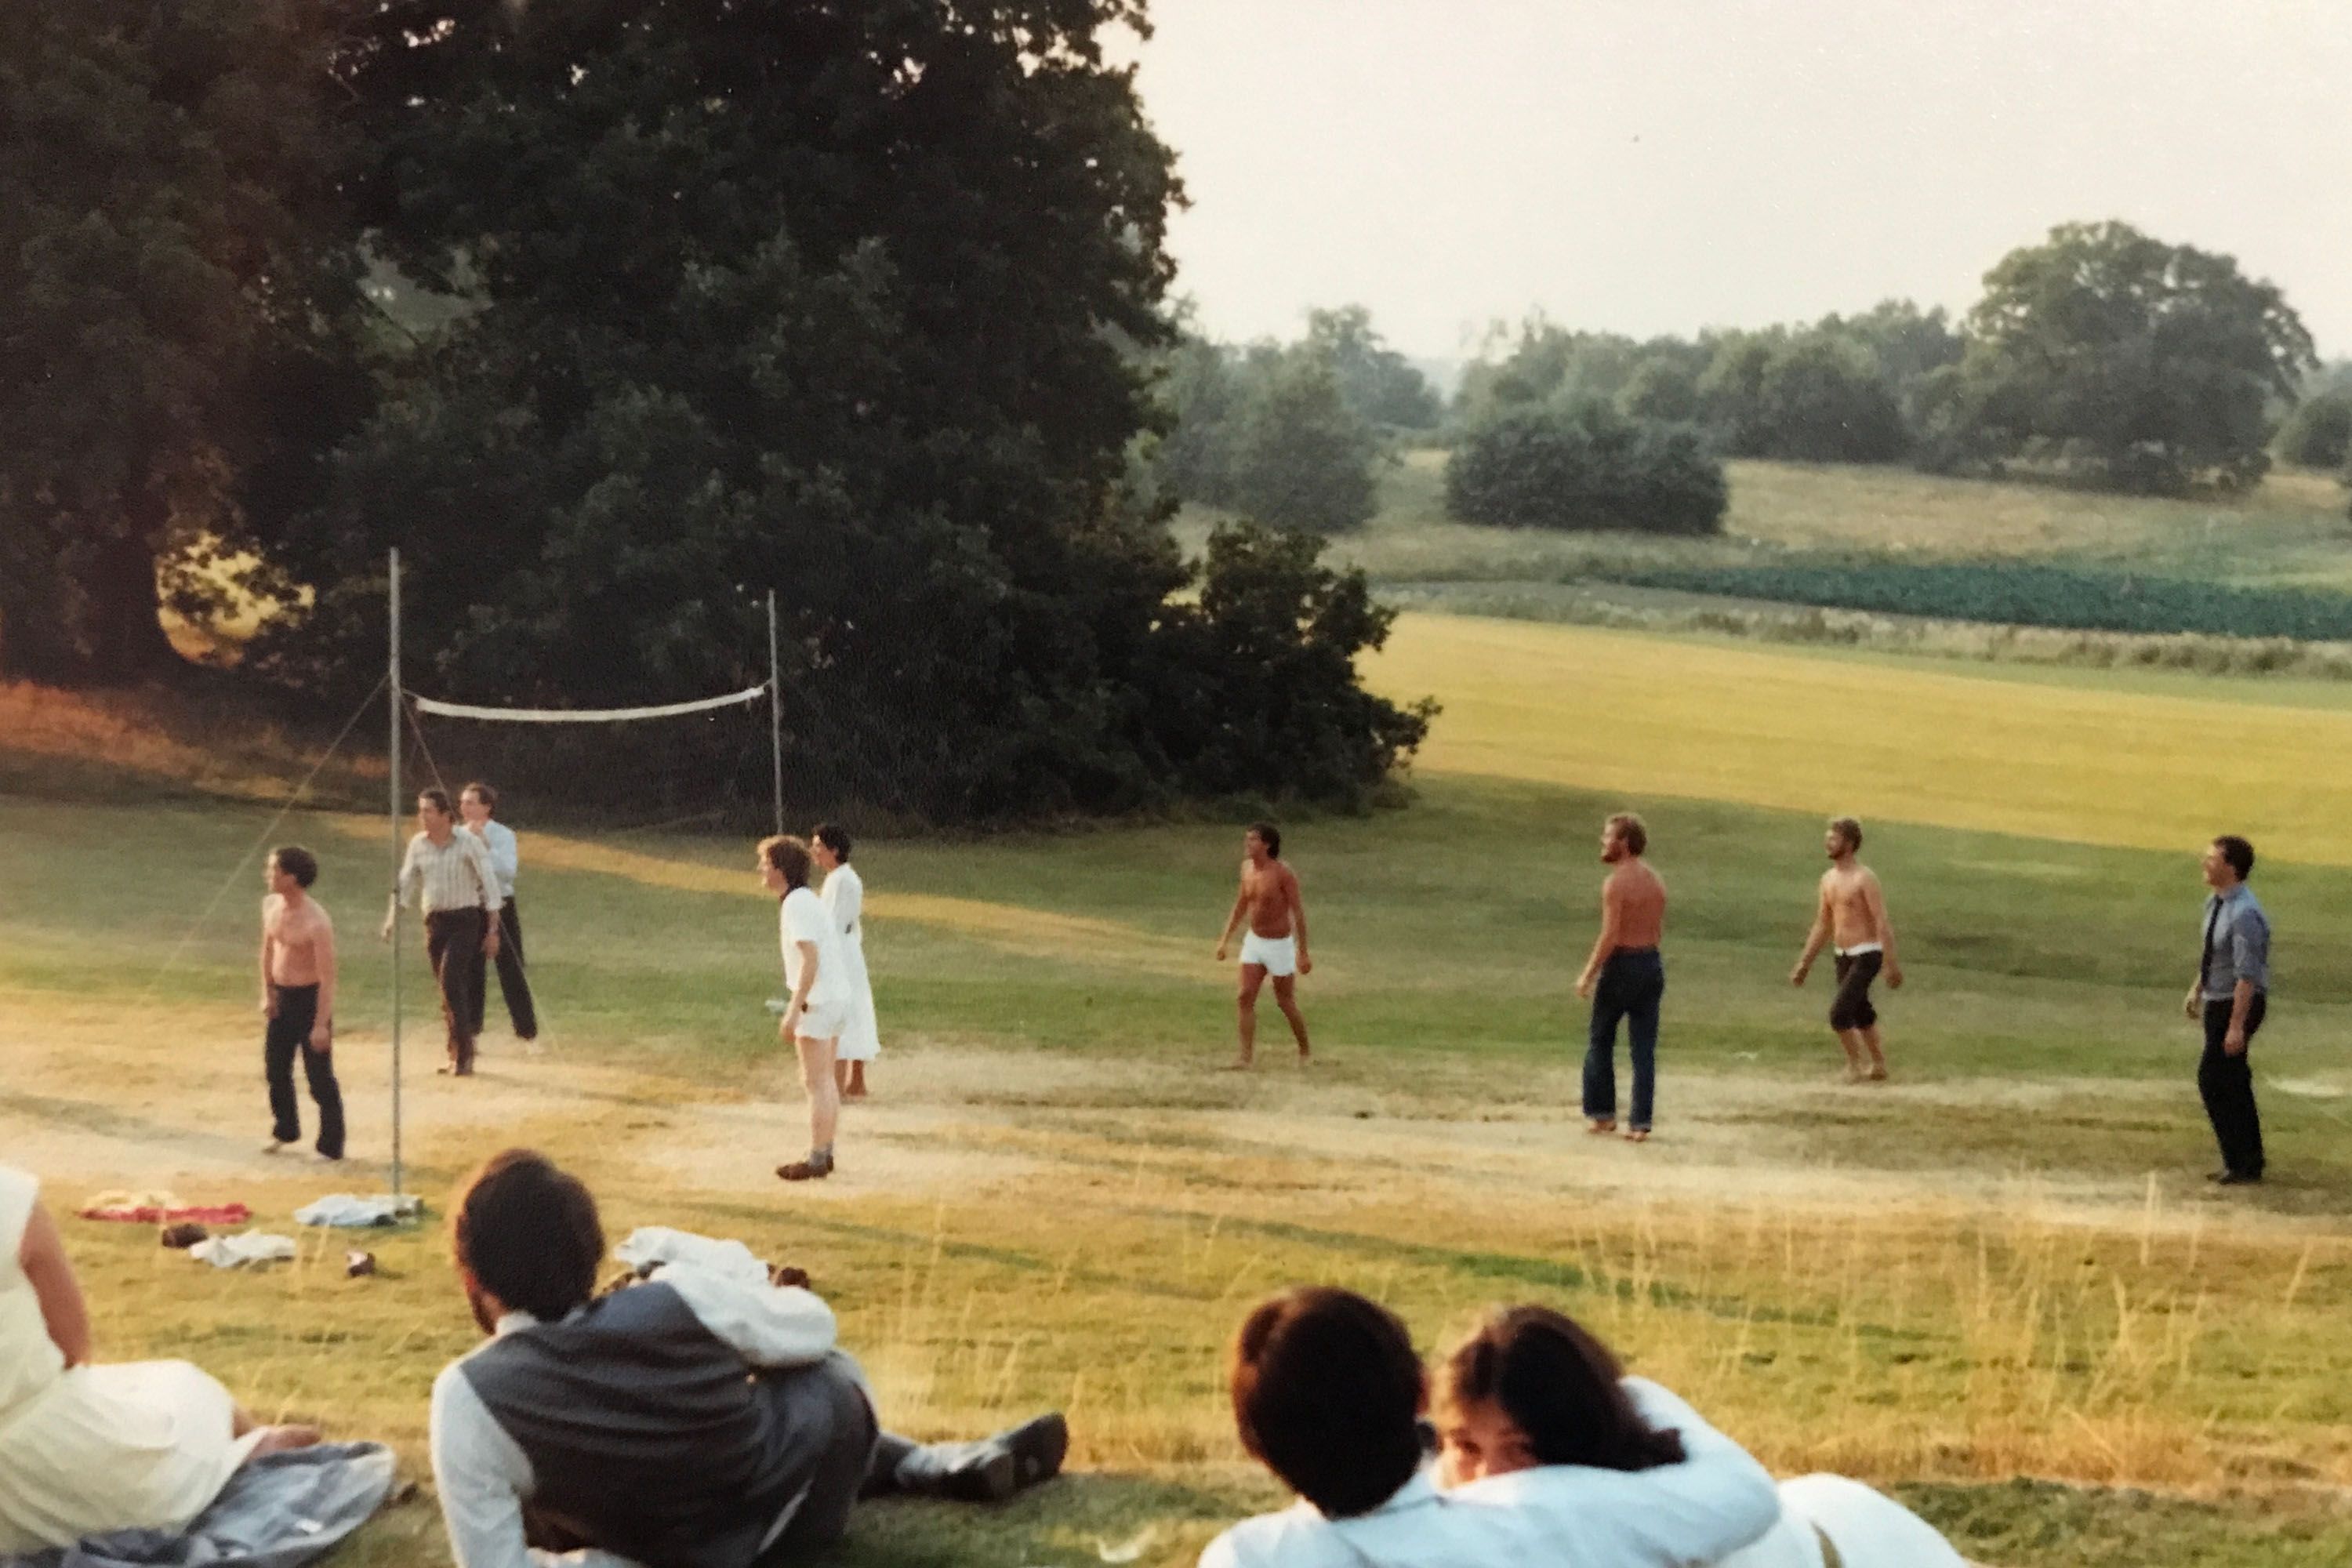 Students socialising in Silwood Park in 1981